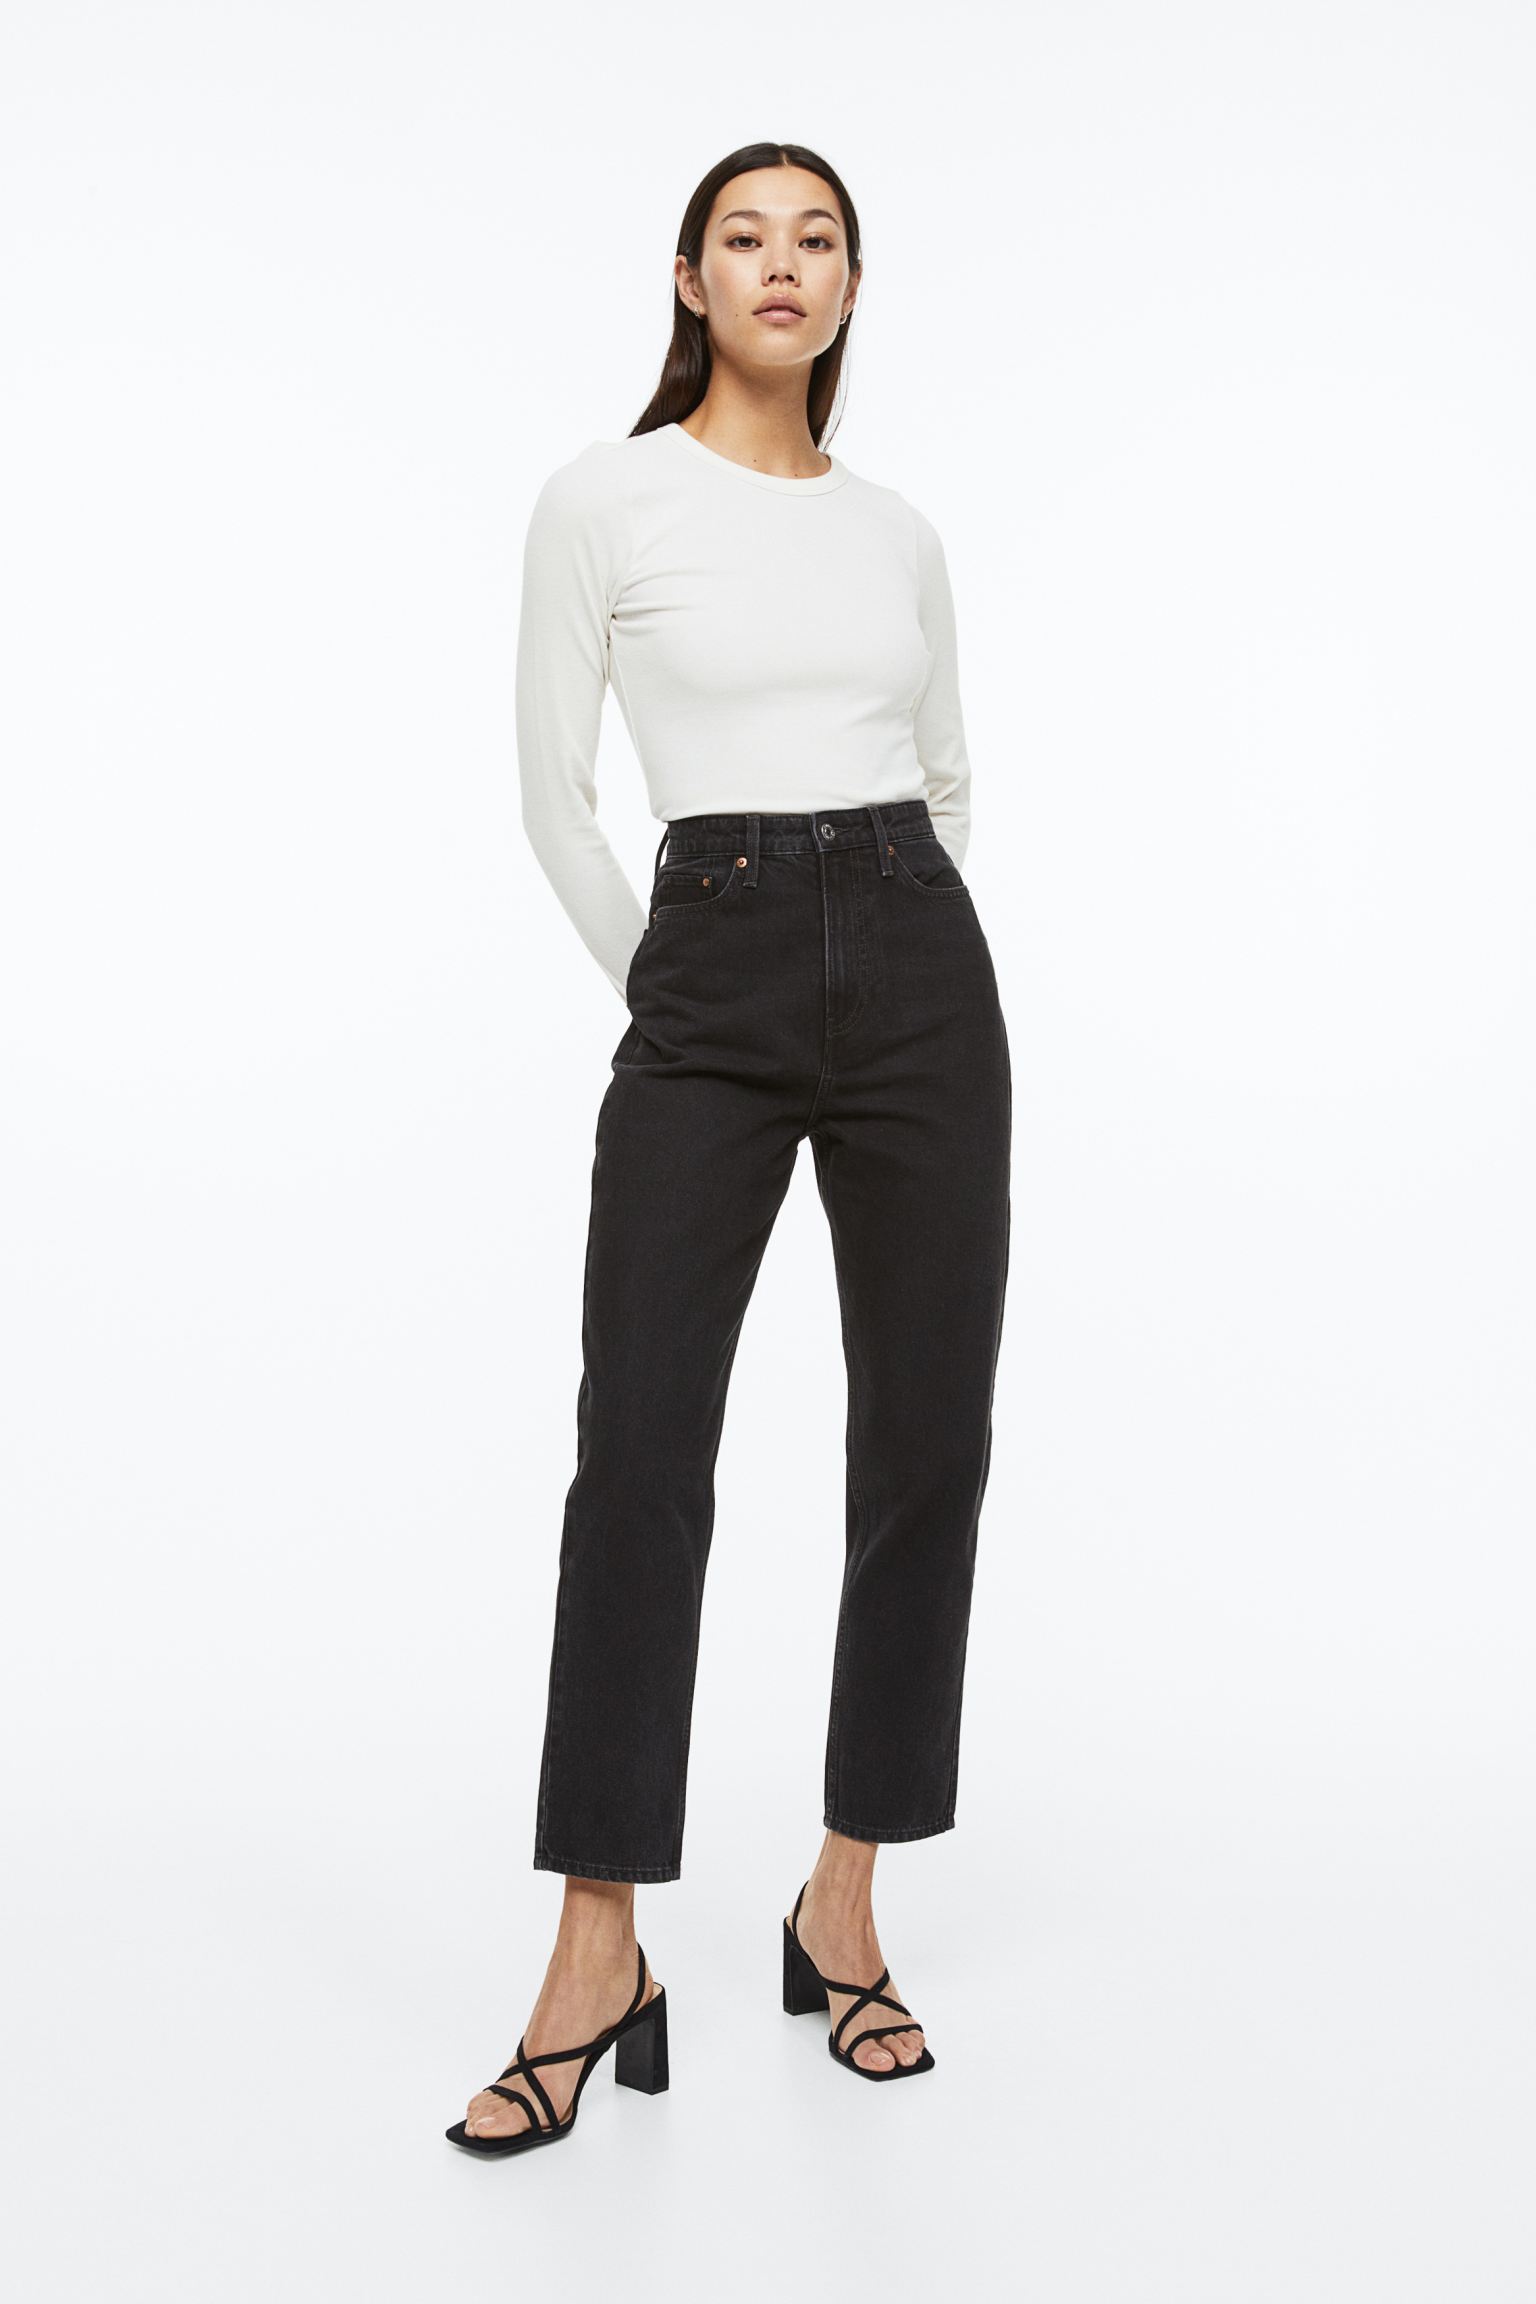 28 Year-Round H&M Basics That Get Editor Approval | Who What Wear UK